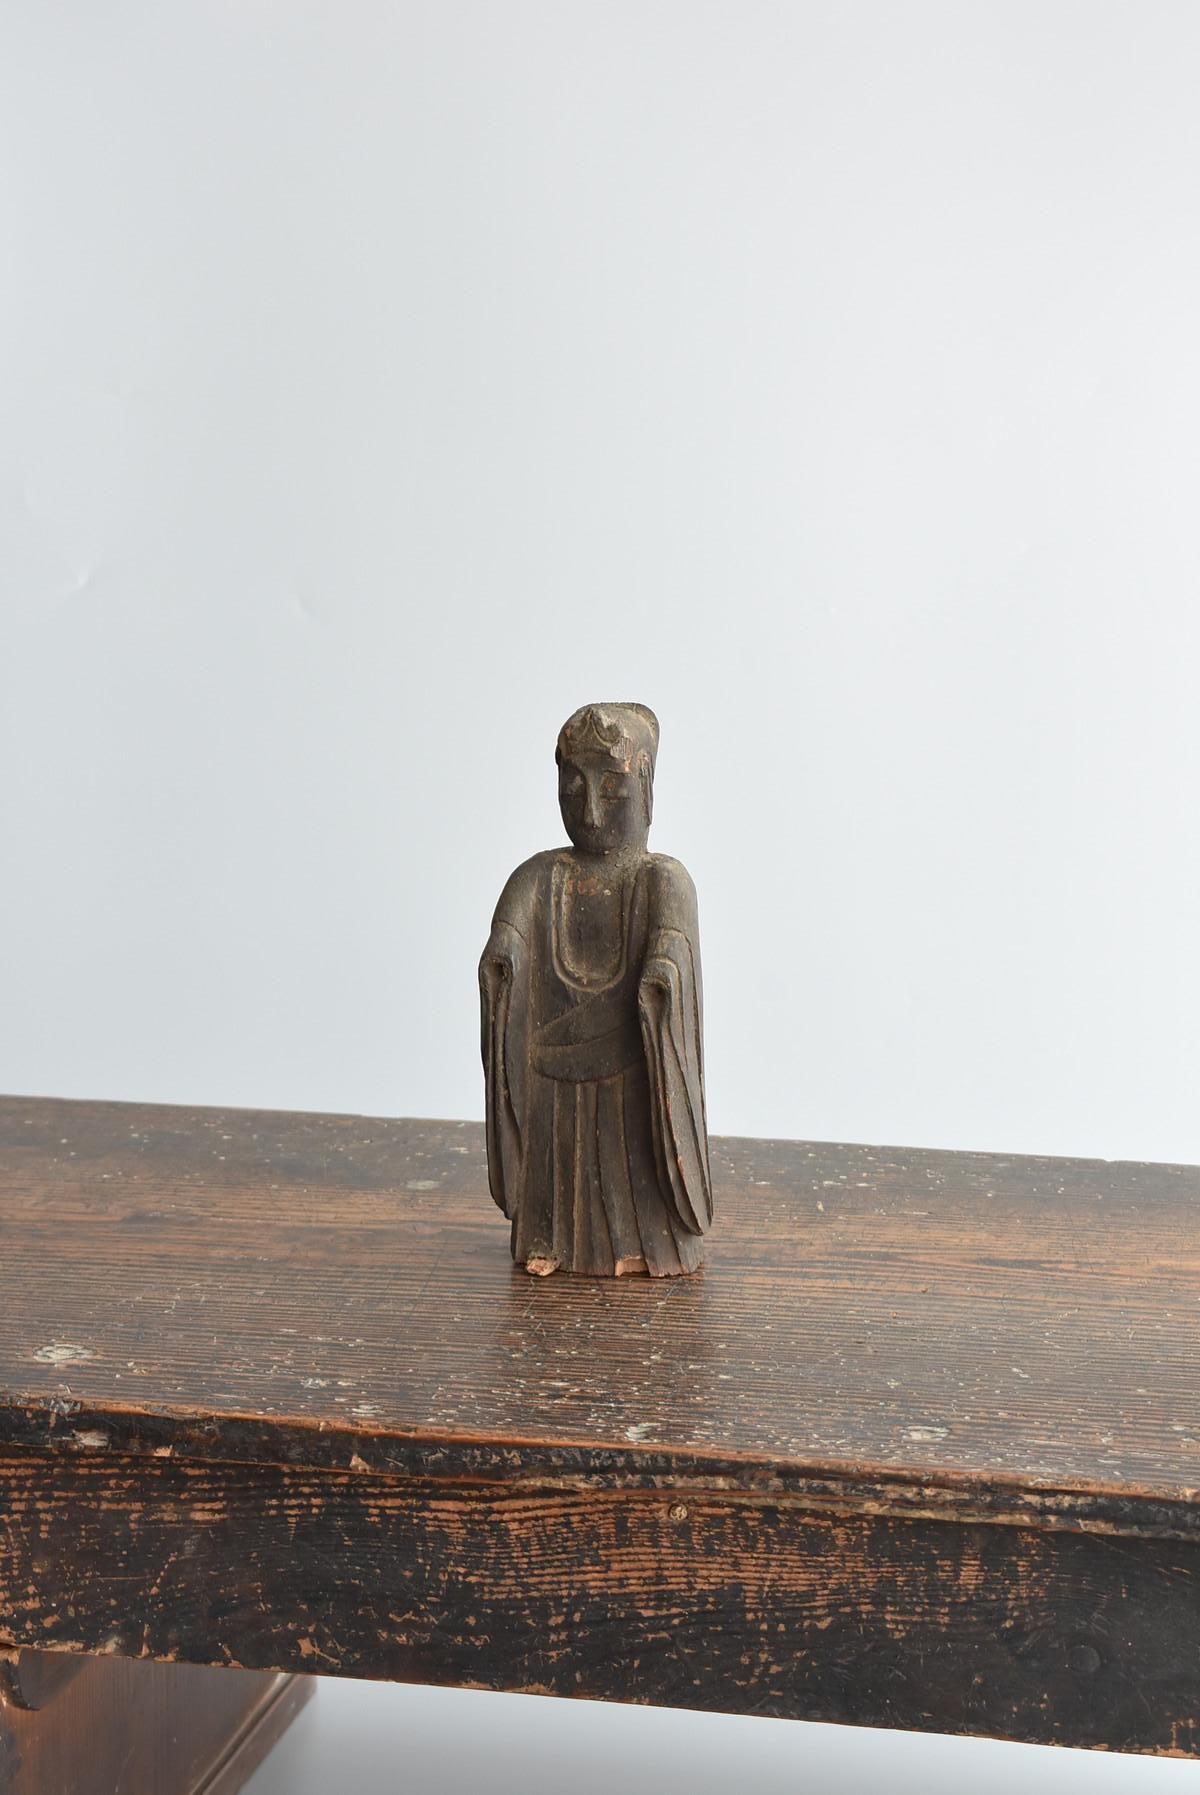 This is a very simple Buddha statue.
I think it is from the late Edo period.

It is a folk Buddhist statue, so it was probably placed in a small village.
People must have been praying to it on a daily basis.
It must have been very familiar to